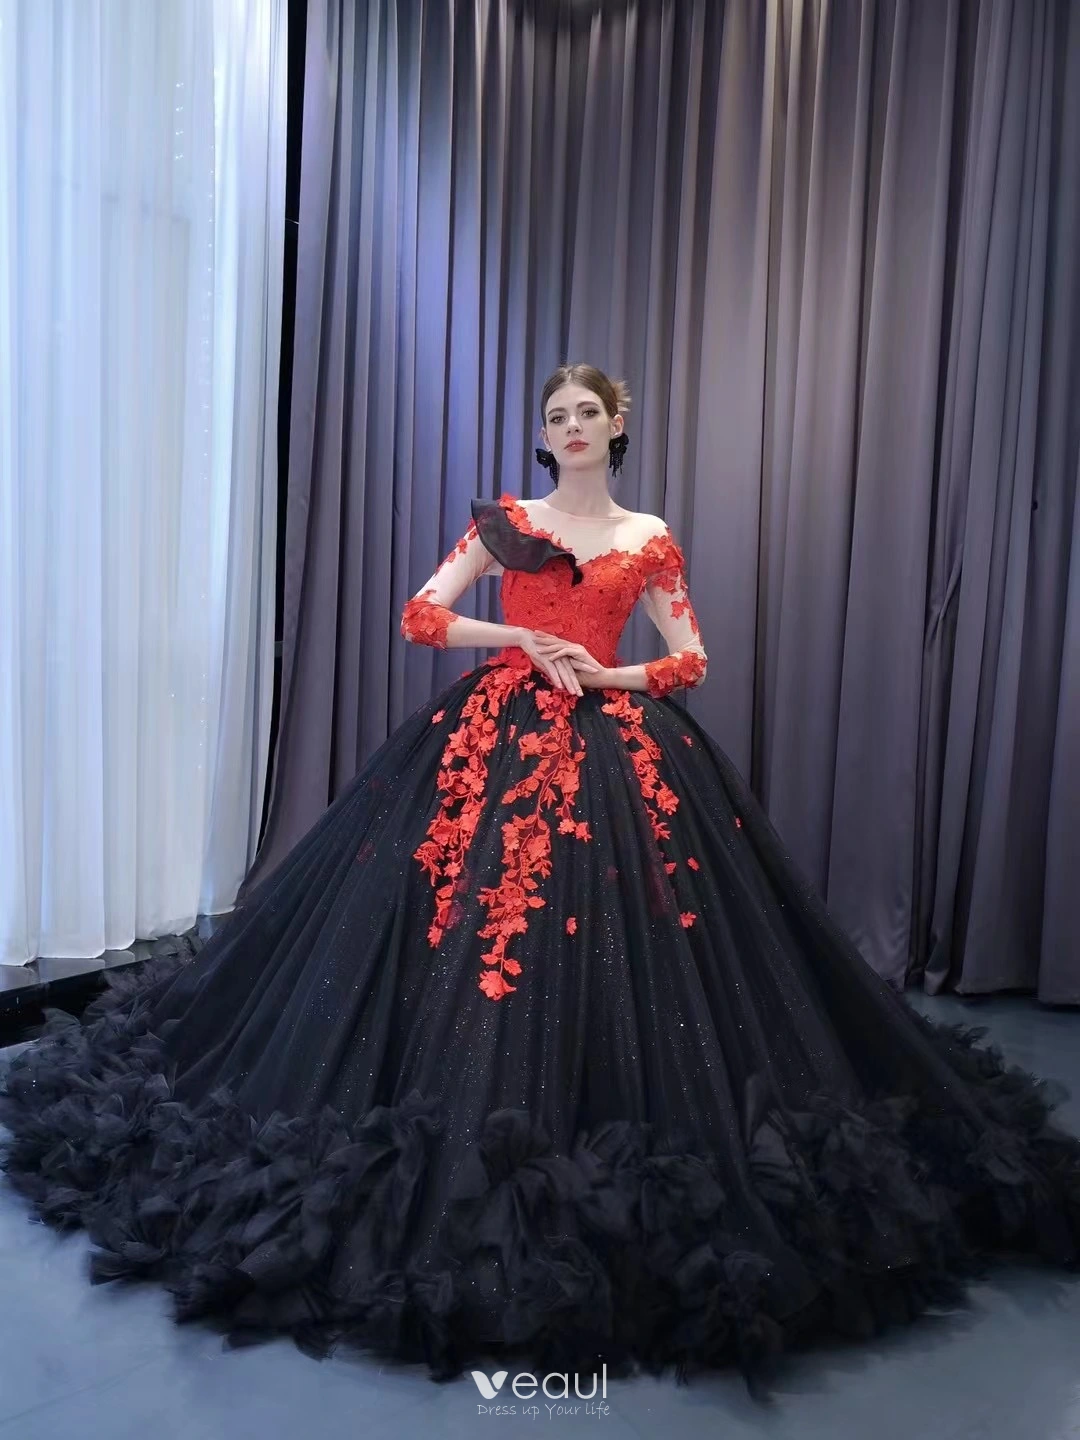 Ball Gown - The Ultimate Prom Dress for the Queen of the Night - JJ's House